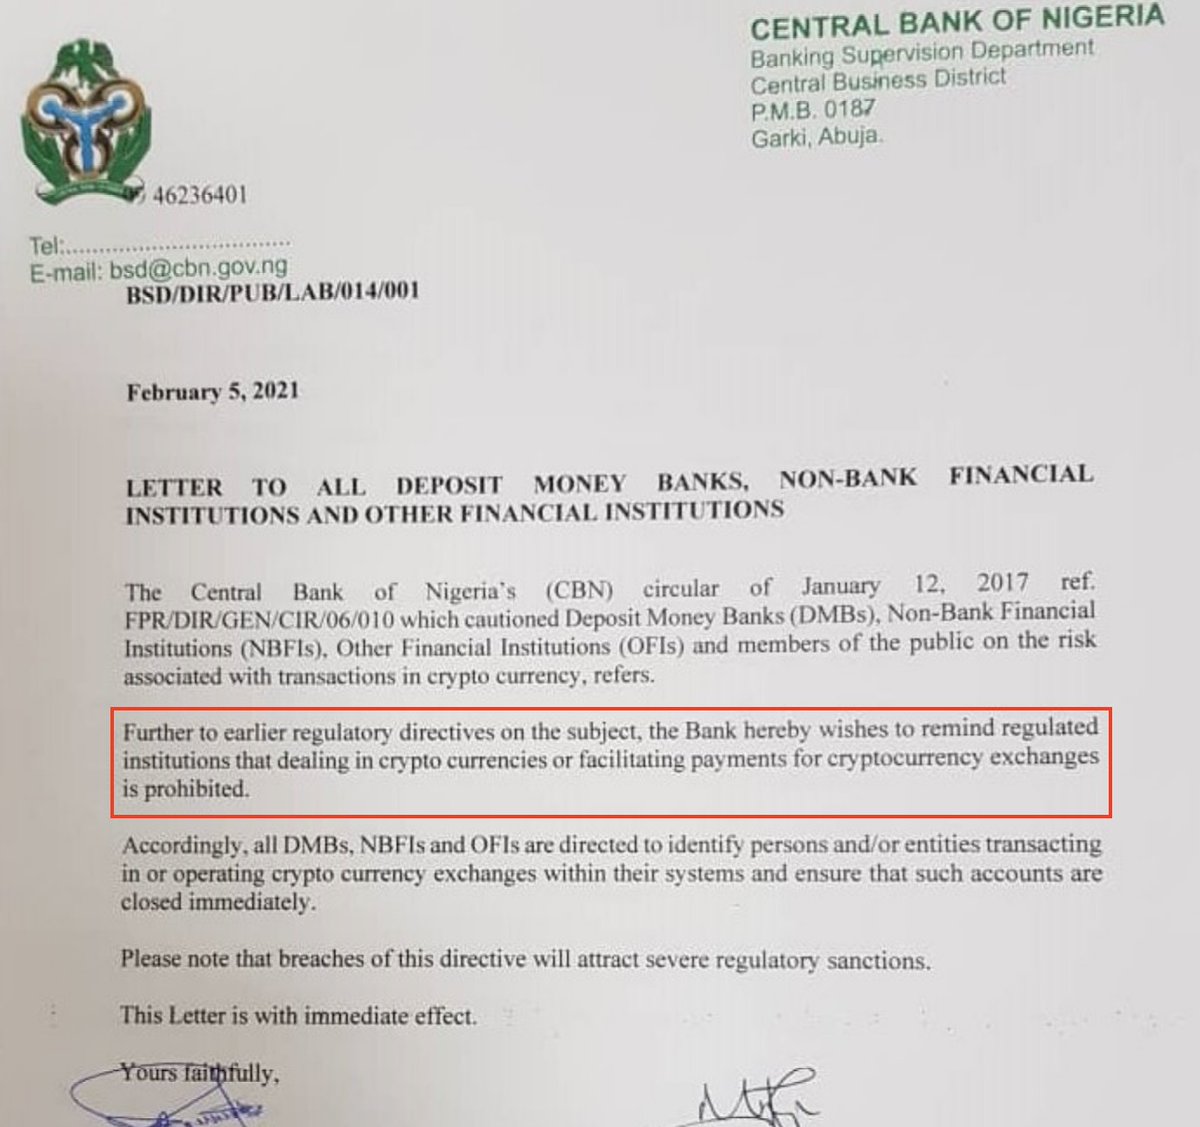 Fast forward to 2021, CBN comes with a circular that said "remember our regulative directives on this subject" when in fact 2017 letter clearly said "no substantive regulation or decision yet" and 2018 said "we wish to caution all and sundry".